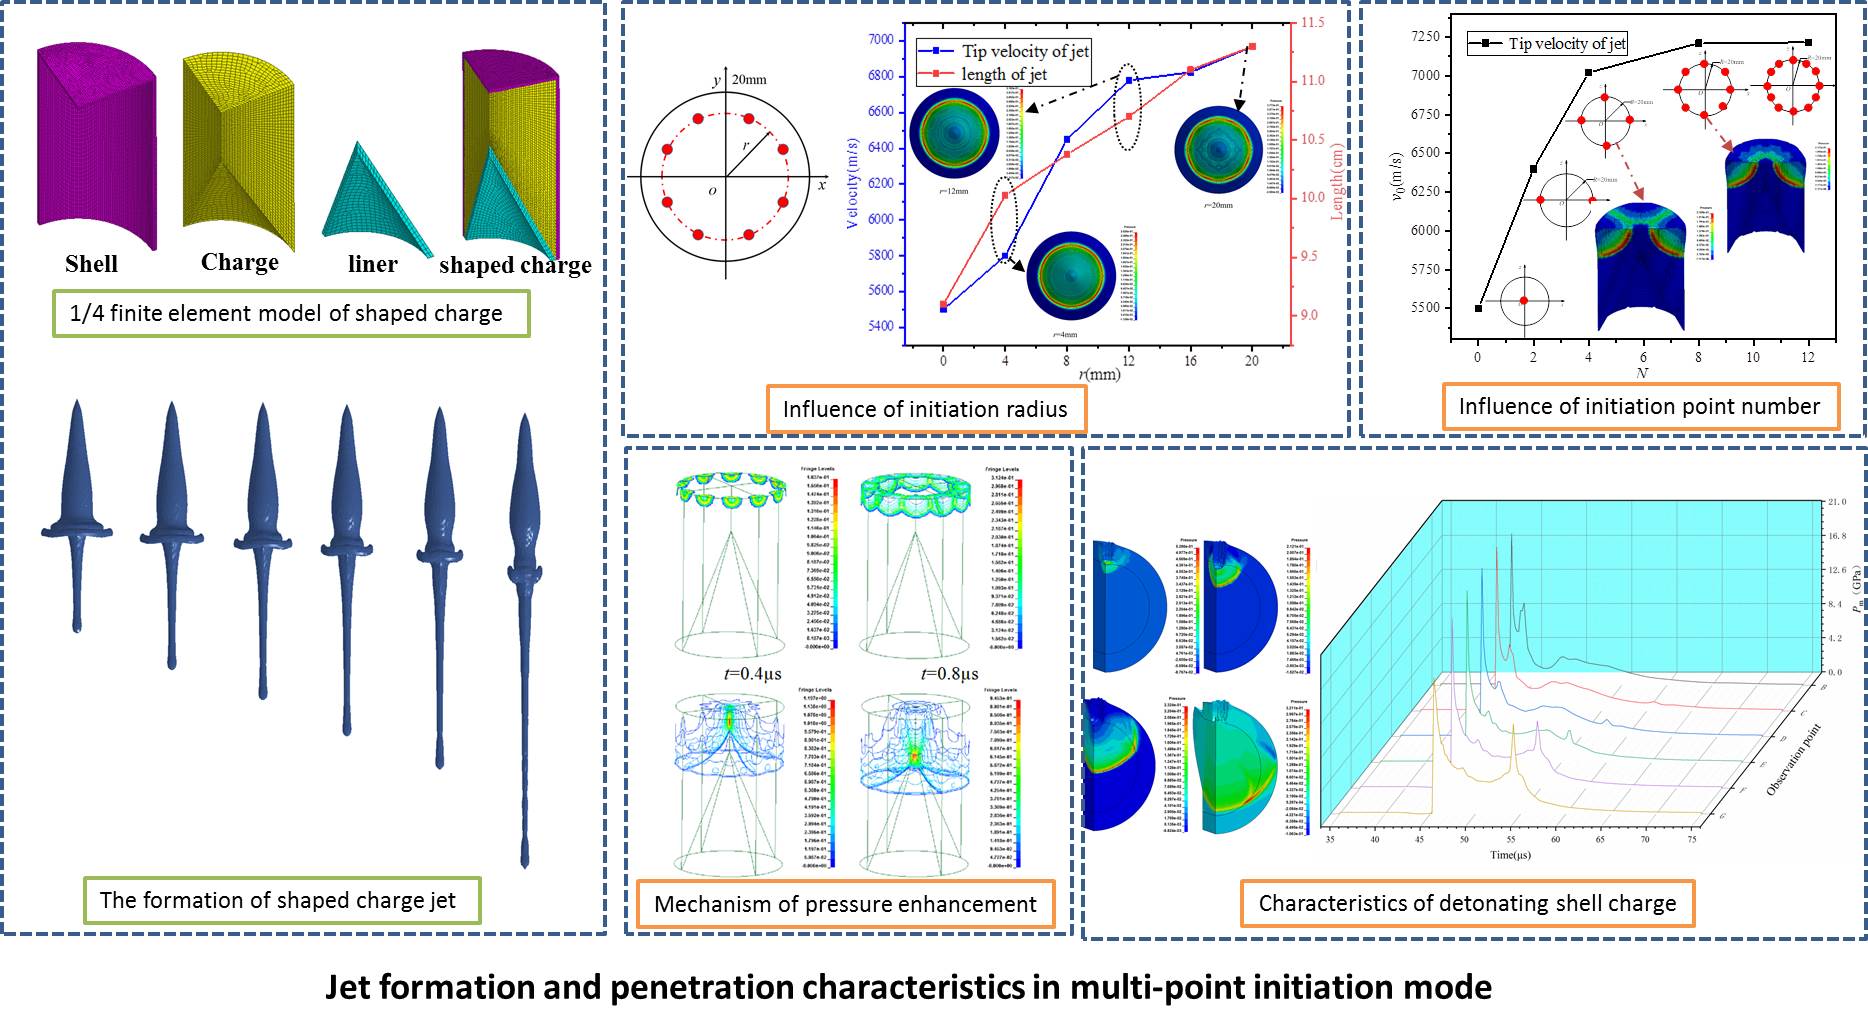 Numerical simulation of jet formation and penetration characteristics in multi-point initiation mode